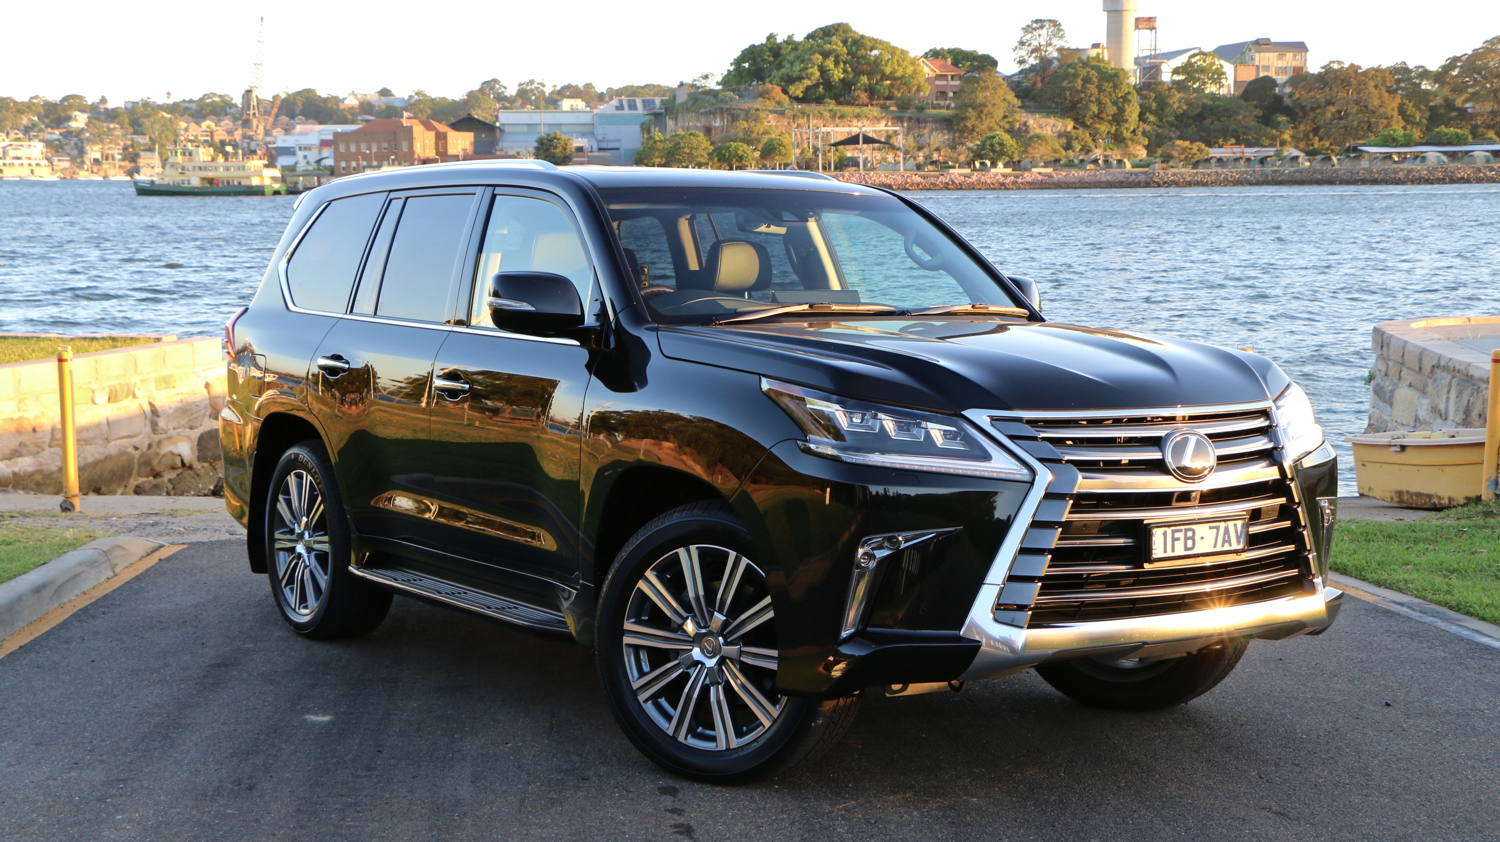 2016-lexus-lx-570-review-chasing-cars